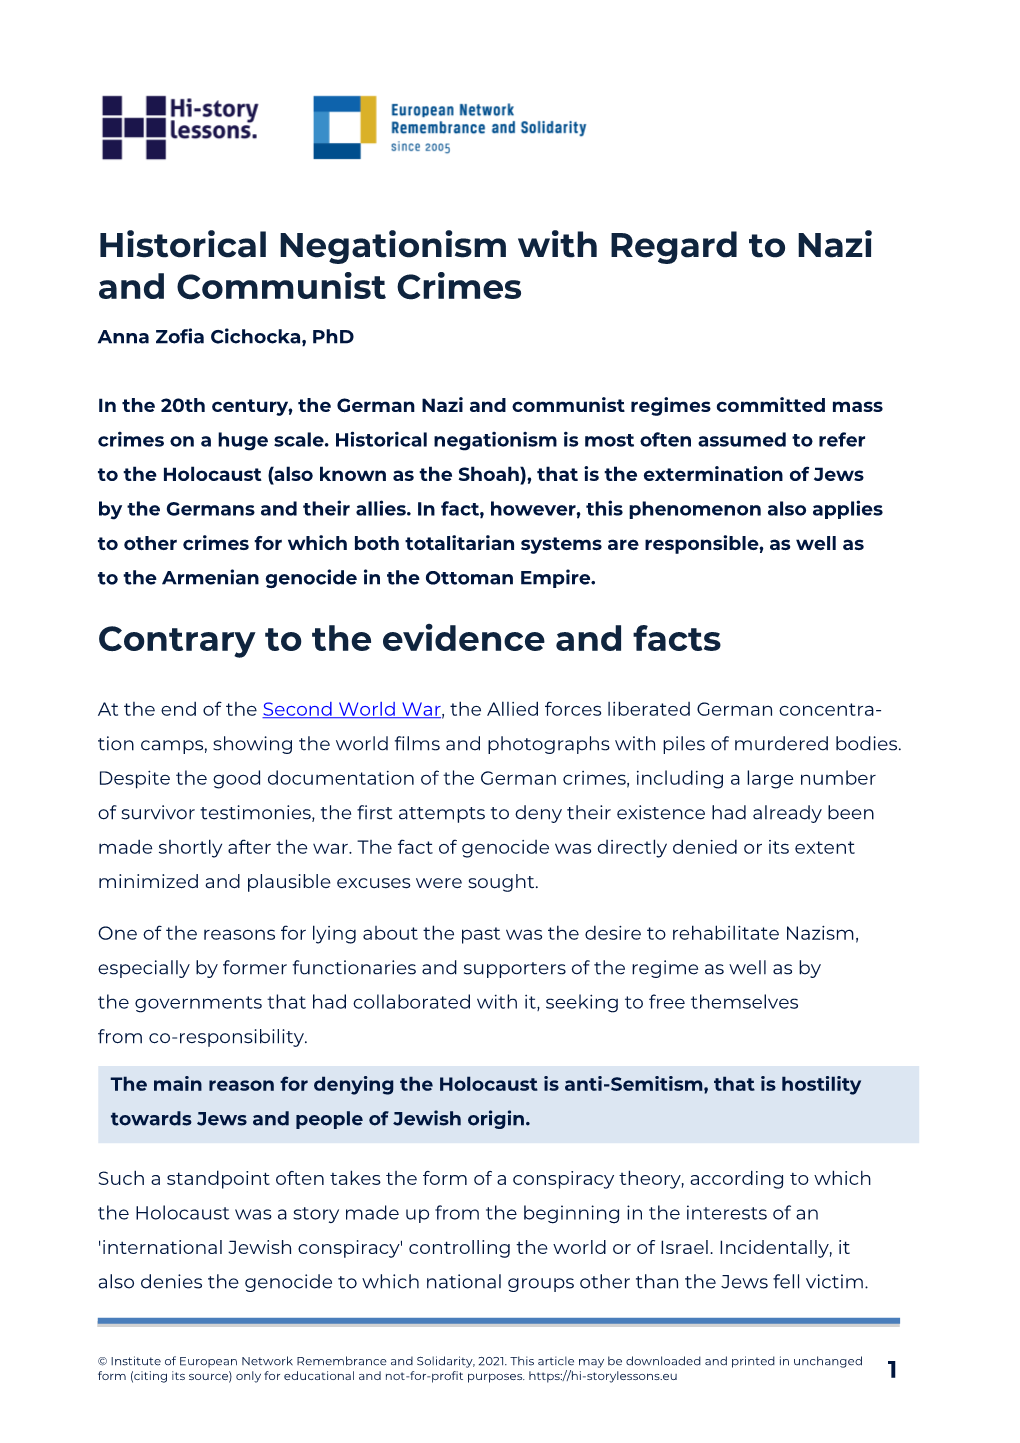 Historical Negationism with Regard to Nazi and Communist Crimes